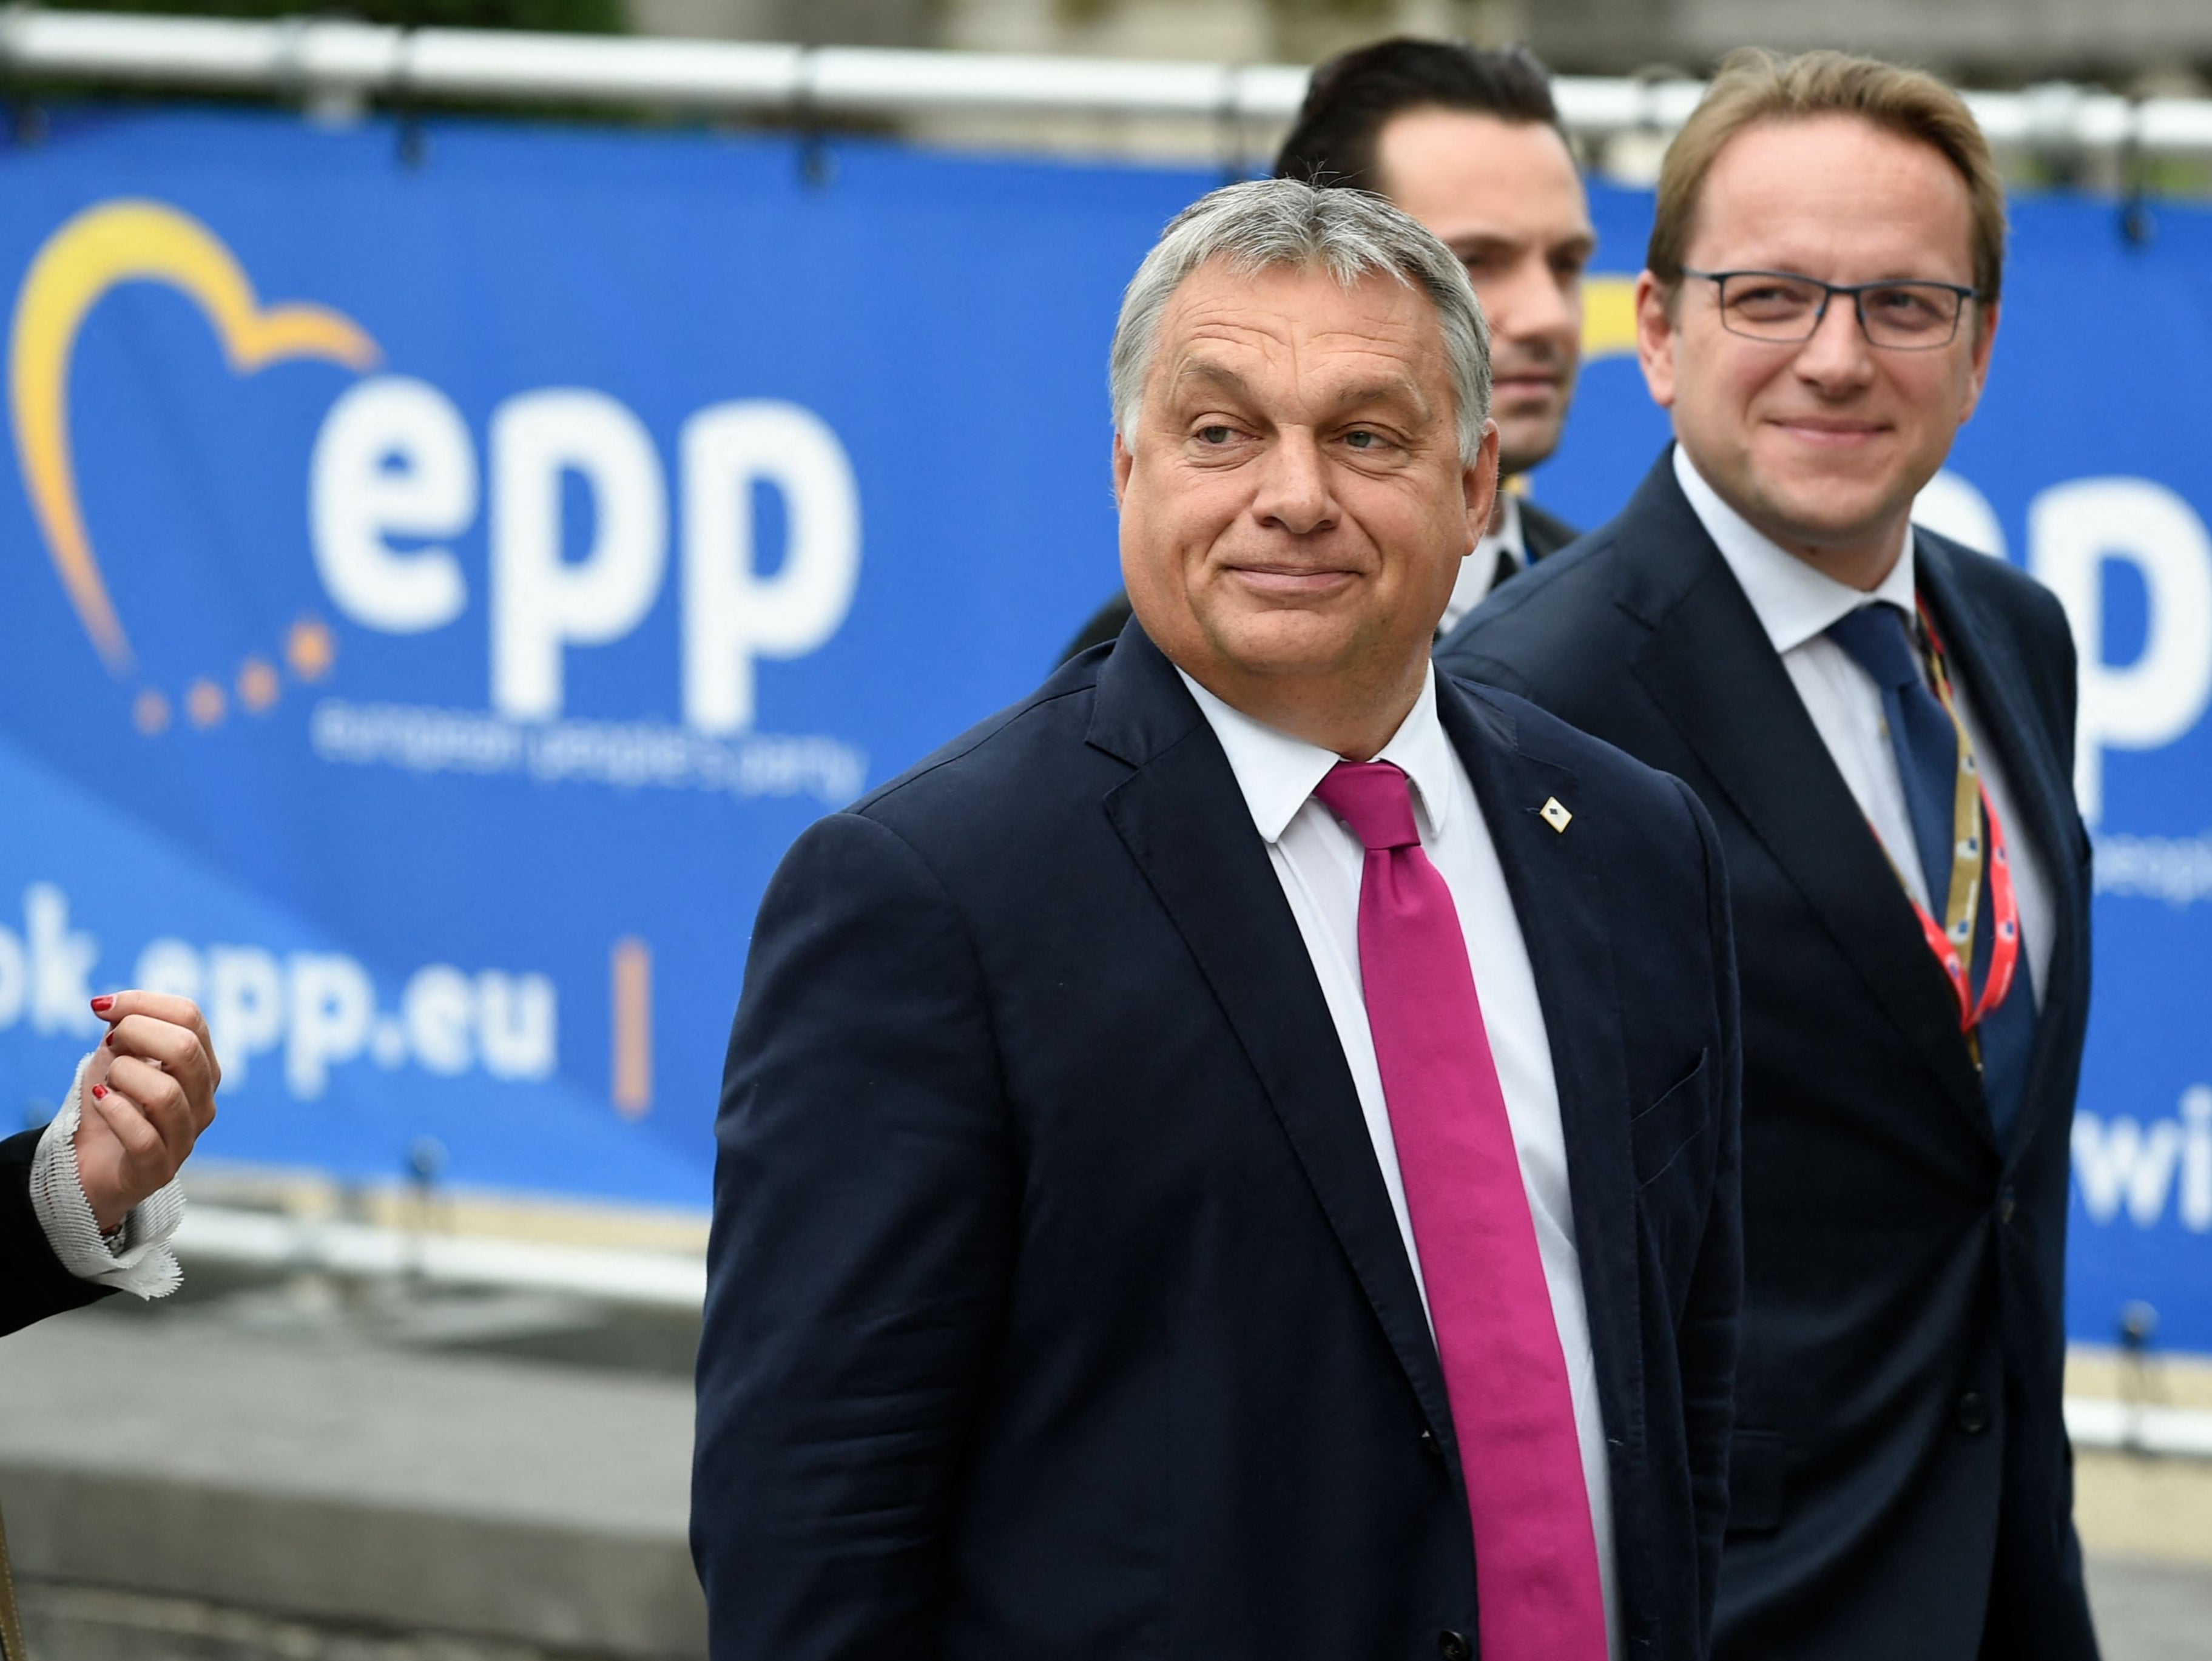 The Hungarian PM’s administration has faced criticism over human rights